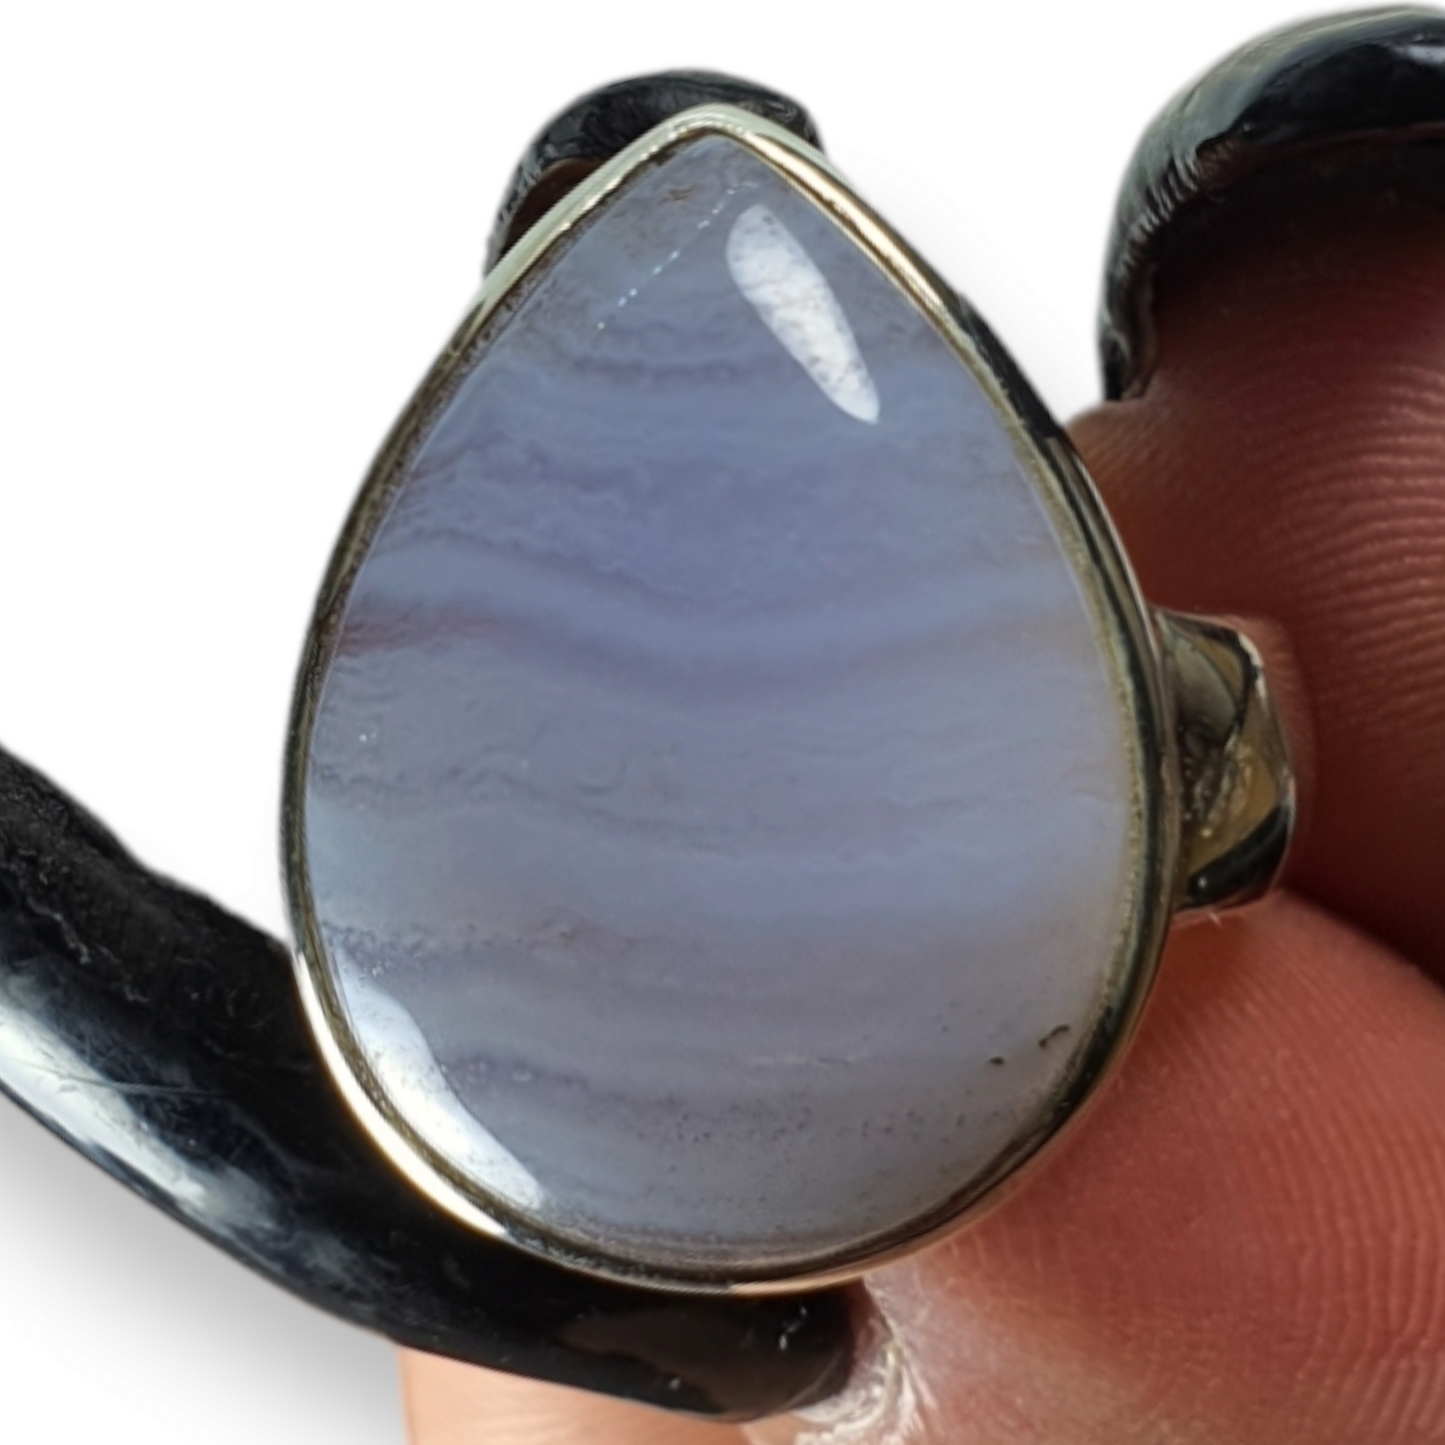 Crystals - Agate (Blue Lace) Teardrop Cabochon Ring - Sterling Silver